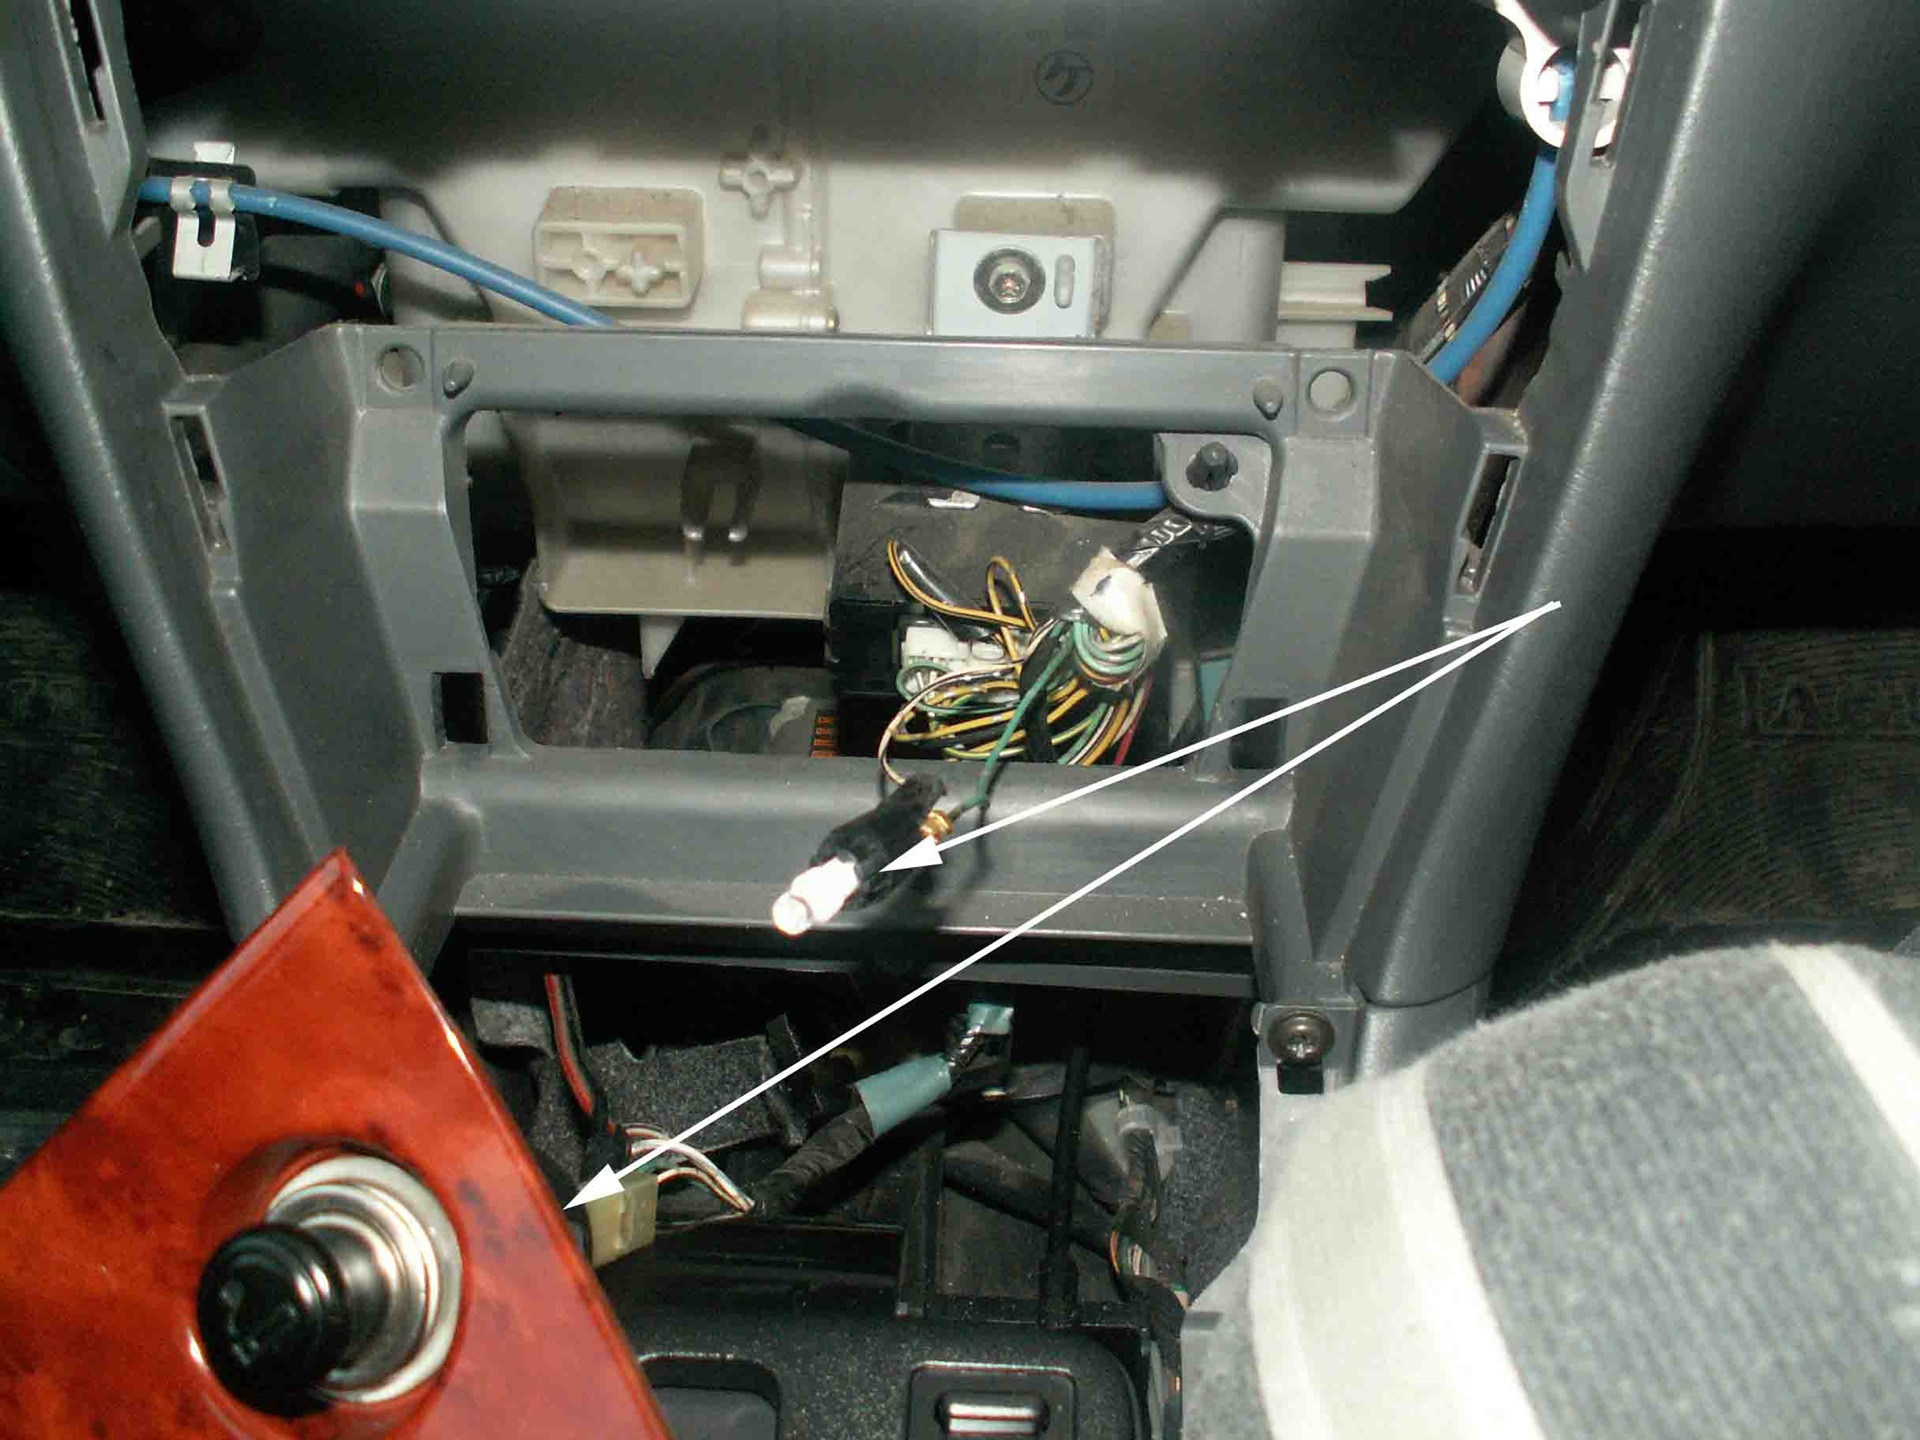 Do it yourself - Replacing the head unit and torpedo lighting - Toyota Corolla 16 liter 2002